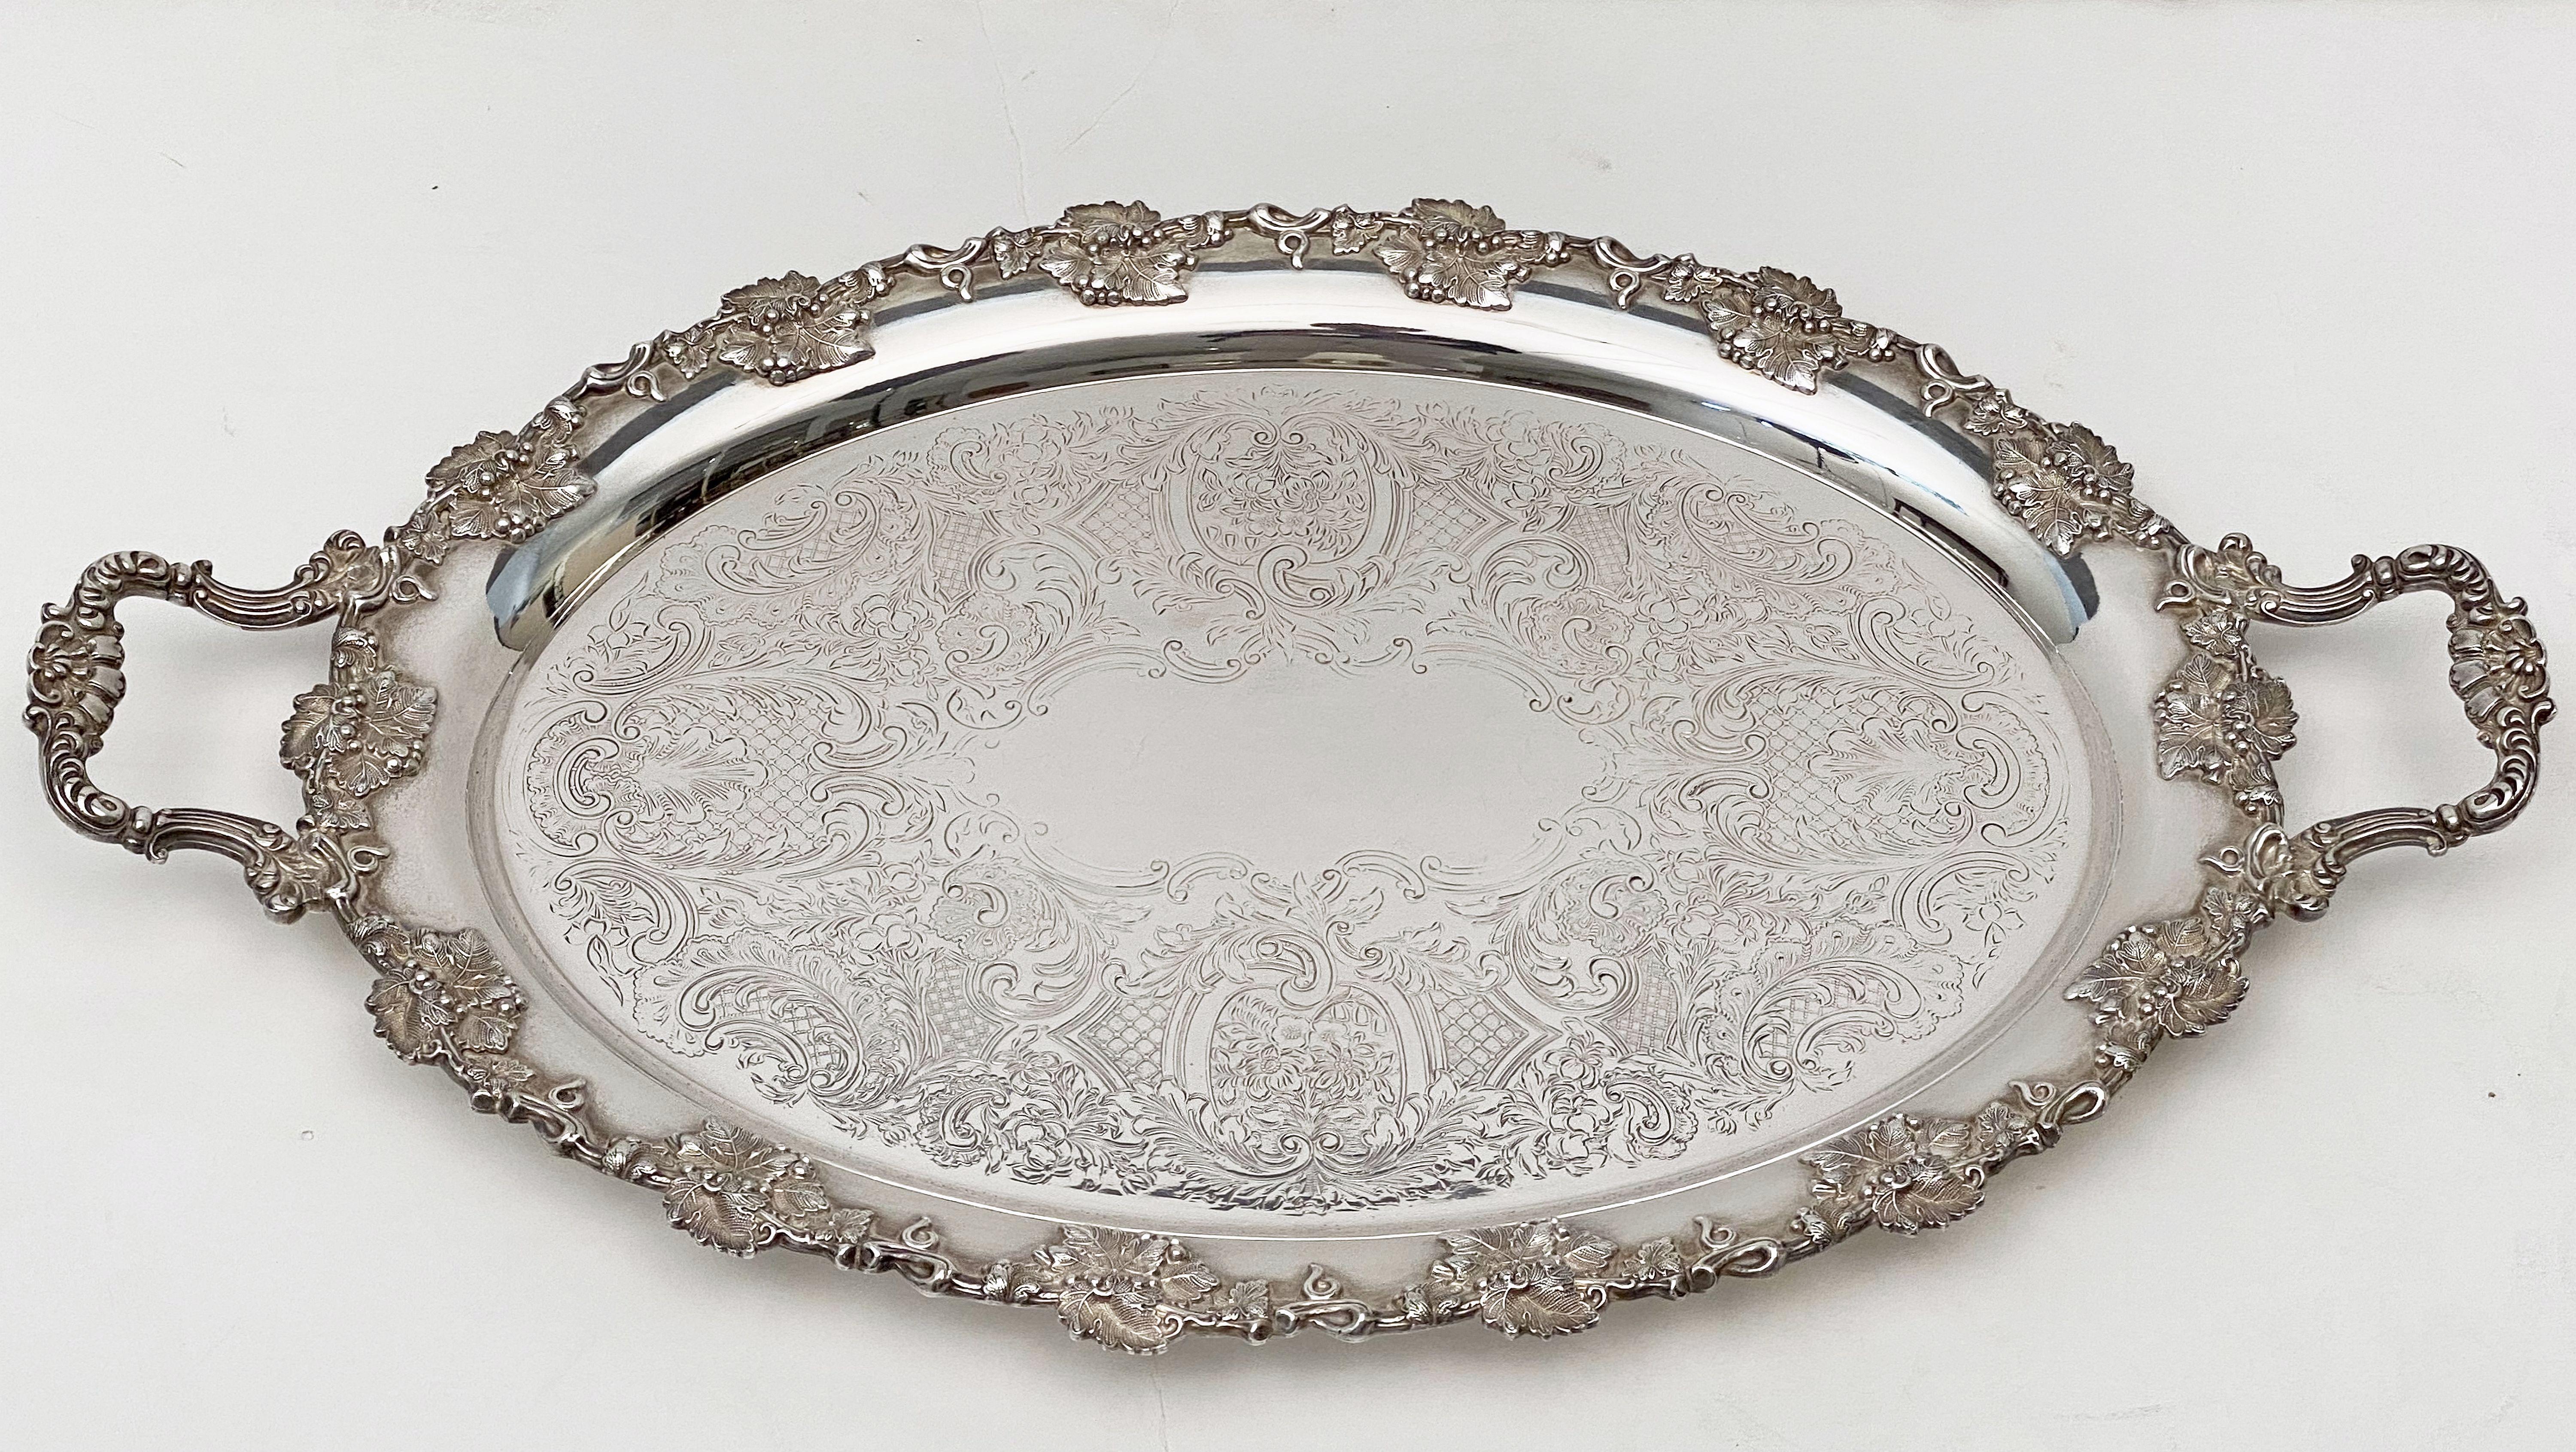 A handsome English oval serving or drinks tray of fine plate silver, featuring two opposing handles and a stylish pattern of grape clusters and leaves around the circumference, with an etched scrollwork design in the center.

Impressed mark on